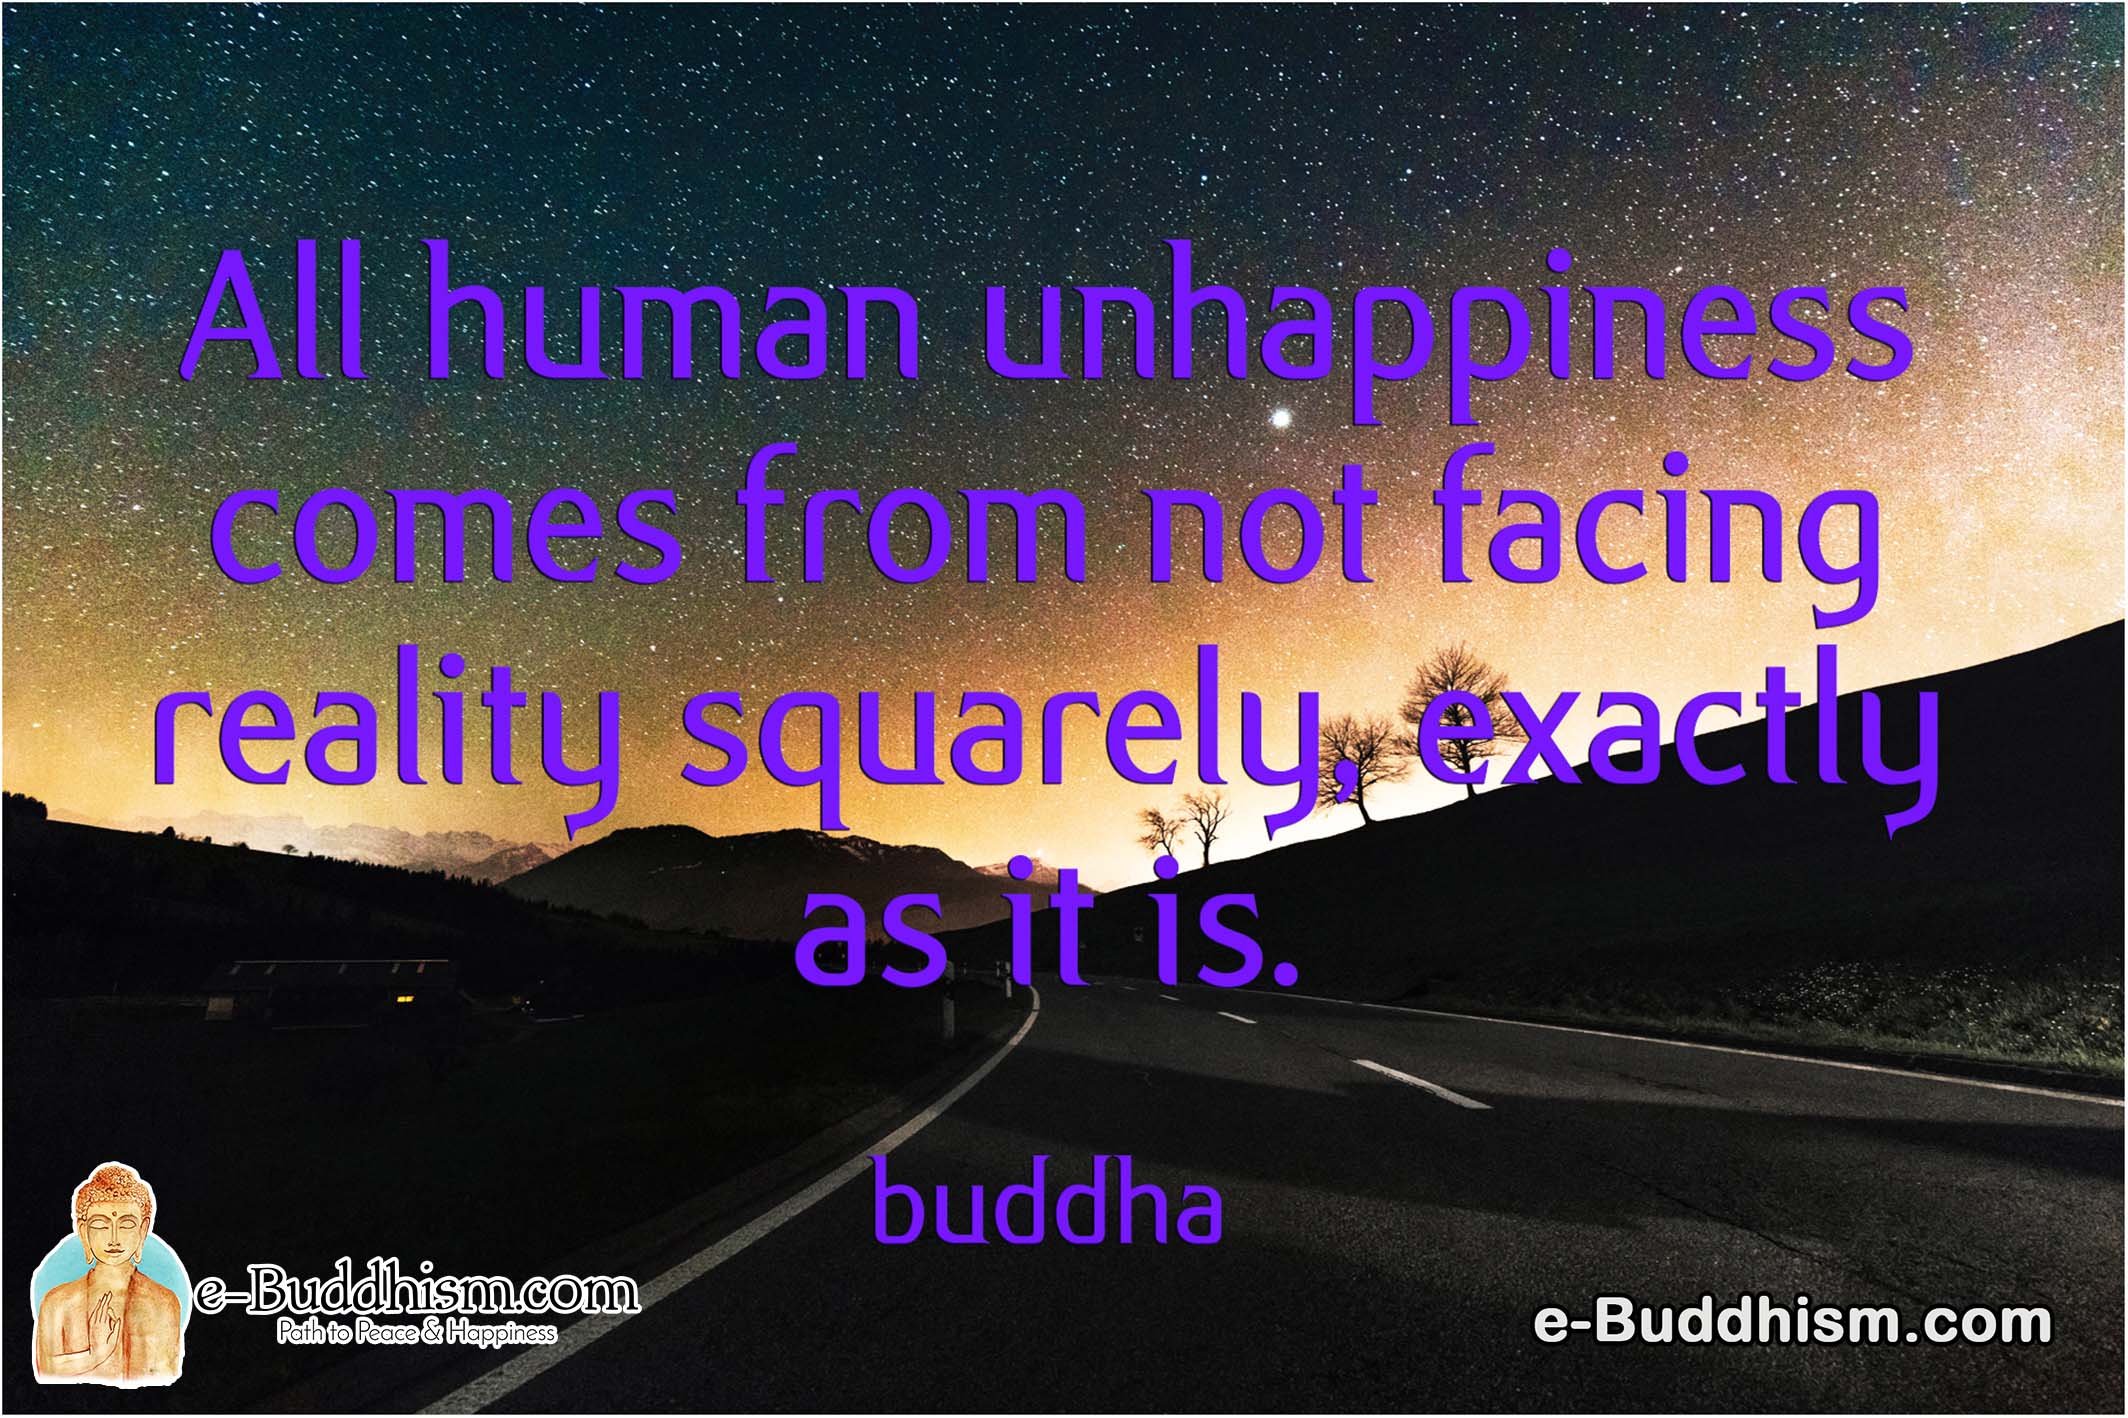 All human unhappiness comes from not facing reality squarely, exactly as it is. -Buddha